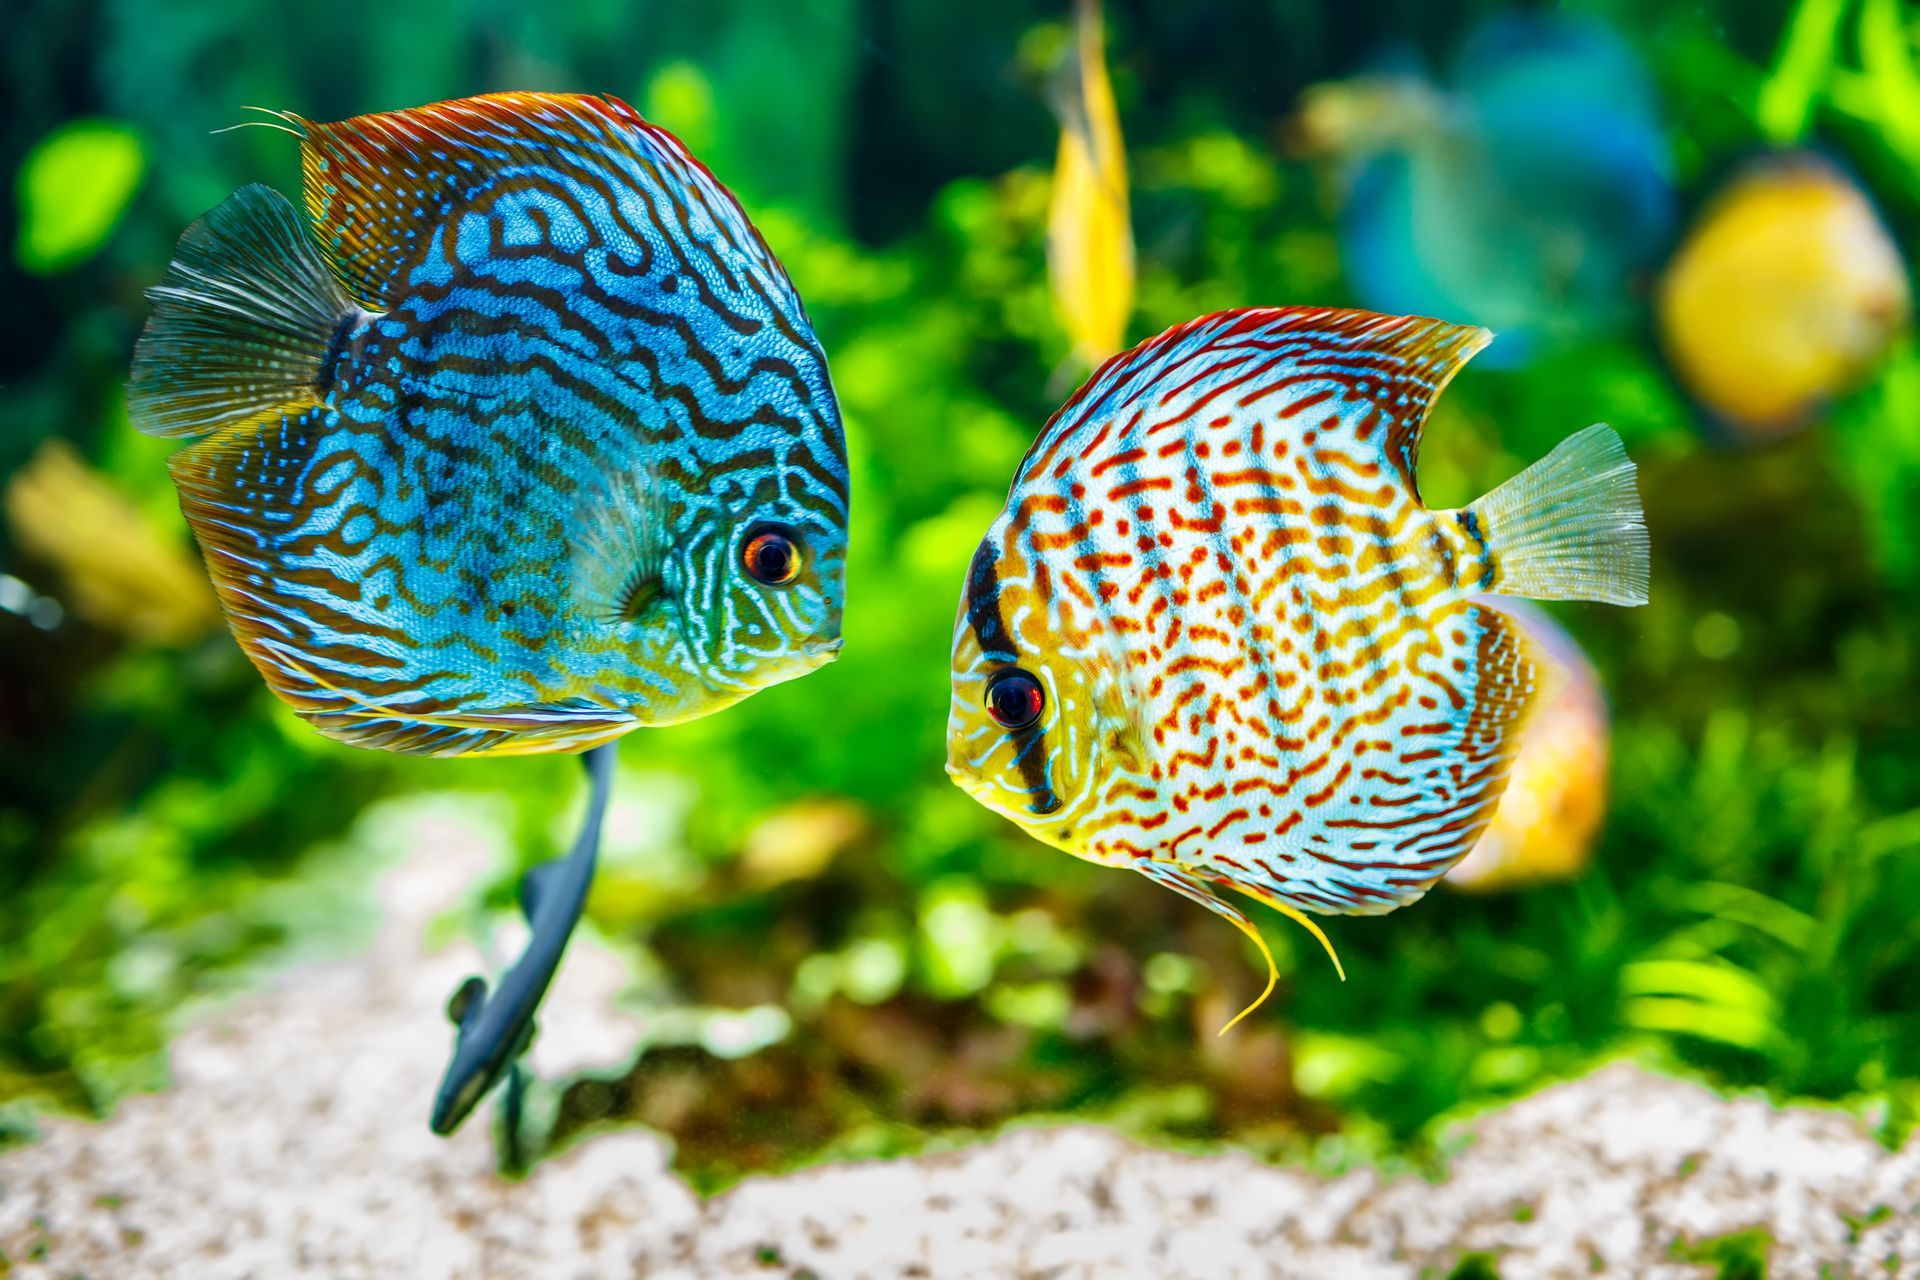 Two colorful fish are swimming in an aquarium.